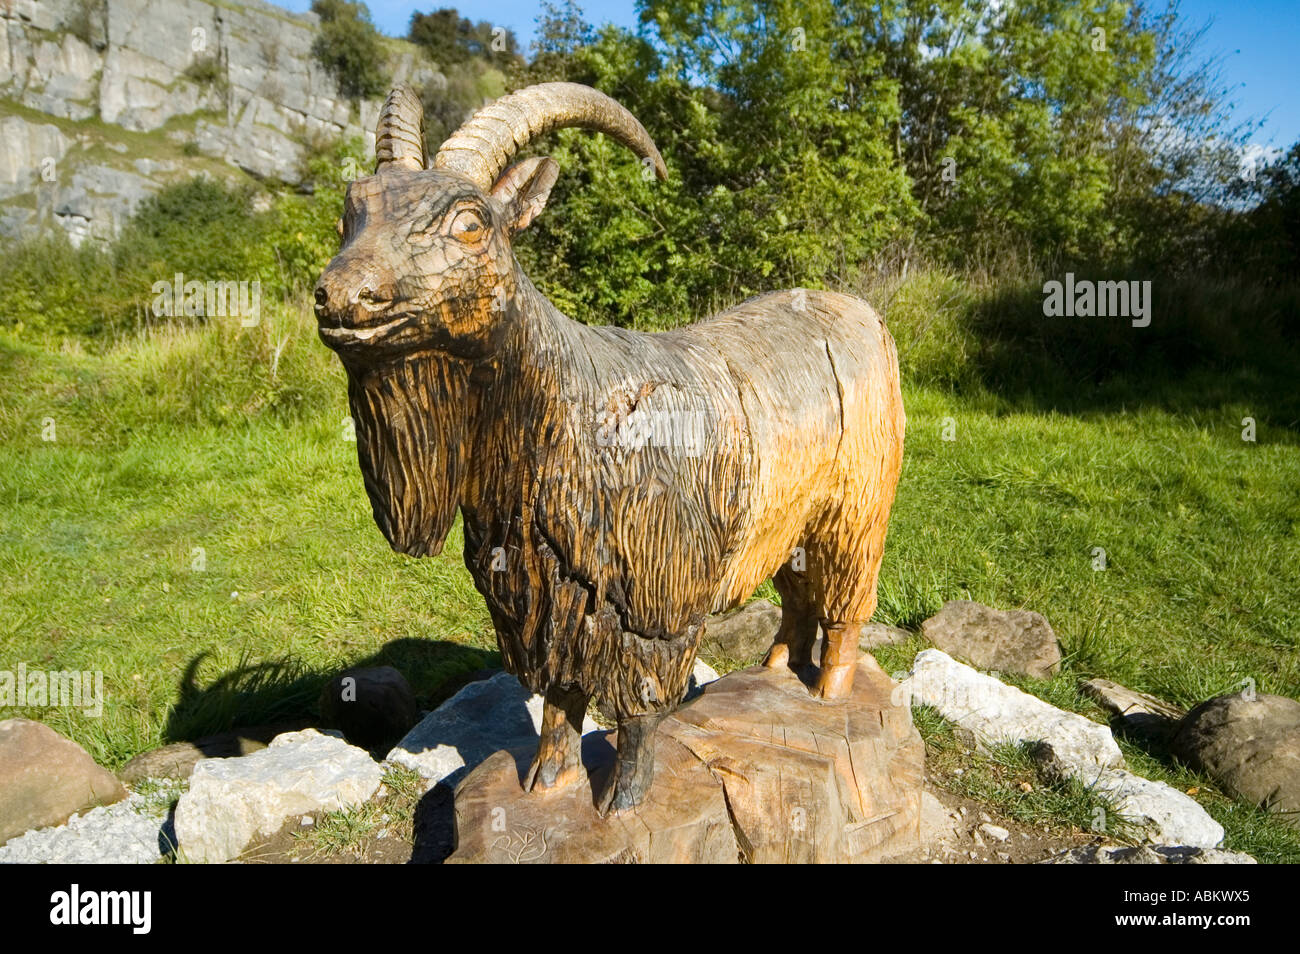 Wood carving of a goat, on the Sculpture Trail at the Crich Tramway Village, near Matlock, Derbyshire, England, UK Stock Photo